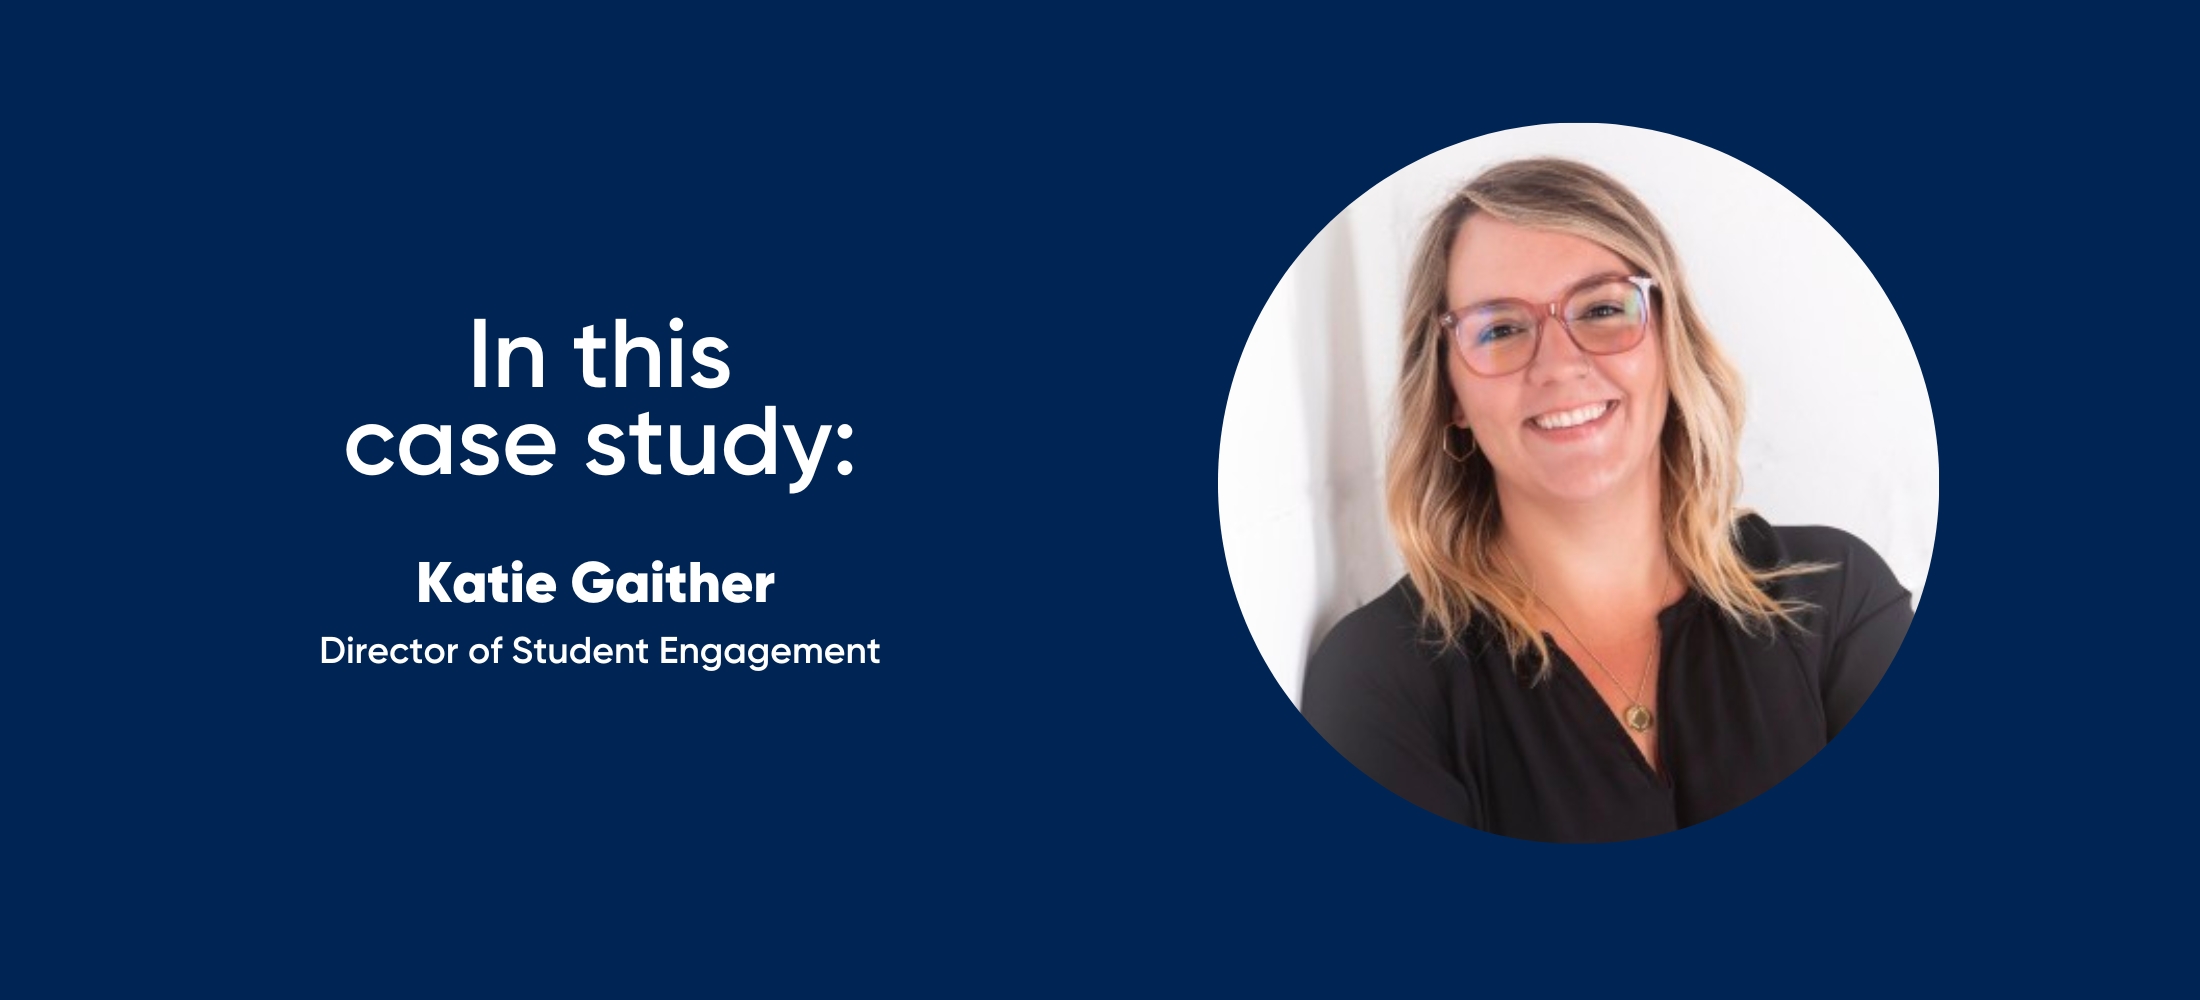 in this case study: Katie Gaither, Director of Student Engagement